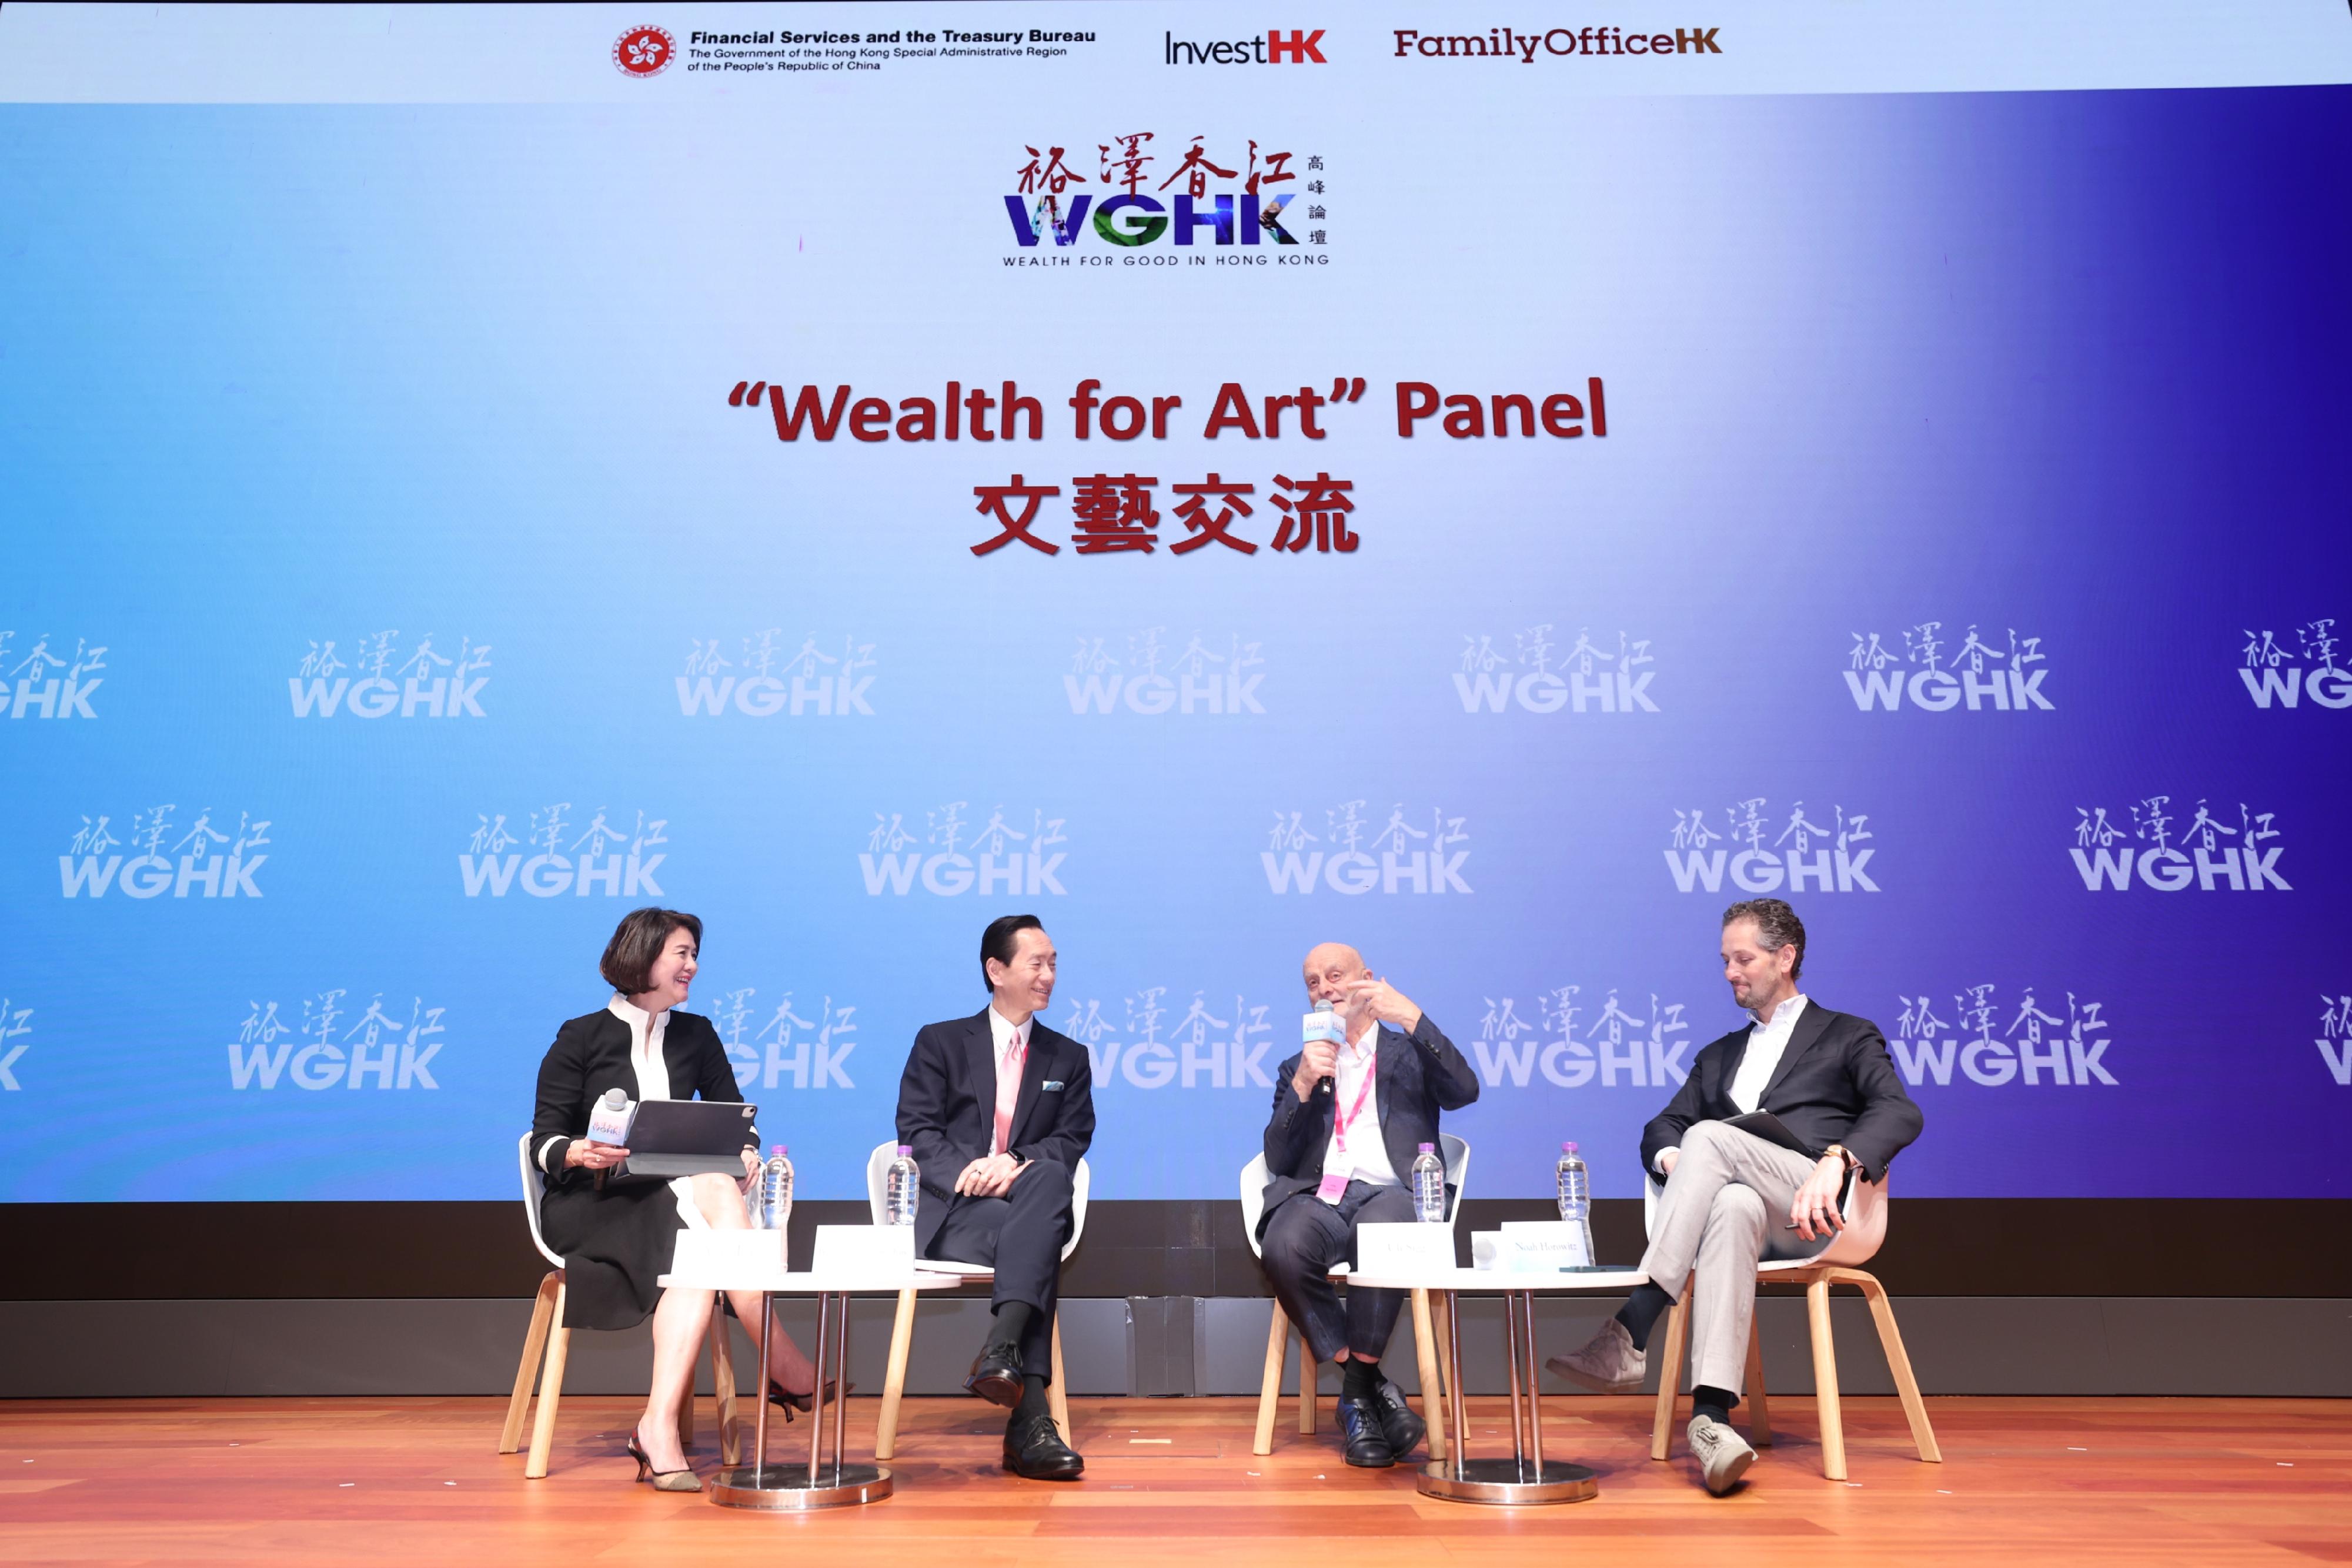 The Wealth for Good in Hong Kong Summit today (March 24) featured a "Wealth for Art" panel discussion moderated by Co-Head UBS Wealth Management APAC, Head and Chief Executive UBS Hong Kong Branch and Group Managing Director, Ms Amy Lo. The panel took a deep dive into the global art scene and discussed why Hong Kong has become an increasingly important global arts and cultural hub, sitting at the intersection of Eastern and Western art tradition and innovation. Panel speakers (from left to right): Ms Lo; the Chairman of M Plus Museum Limited, Mr Bernard Chan; collector of Sigg Collection, entrepreneur and former diplomat, Mr Uli Sigg; and the CEO of Art Basel, Mr Noah Horowitz.